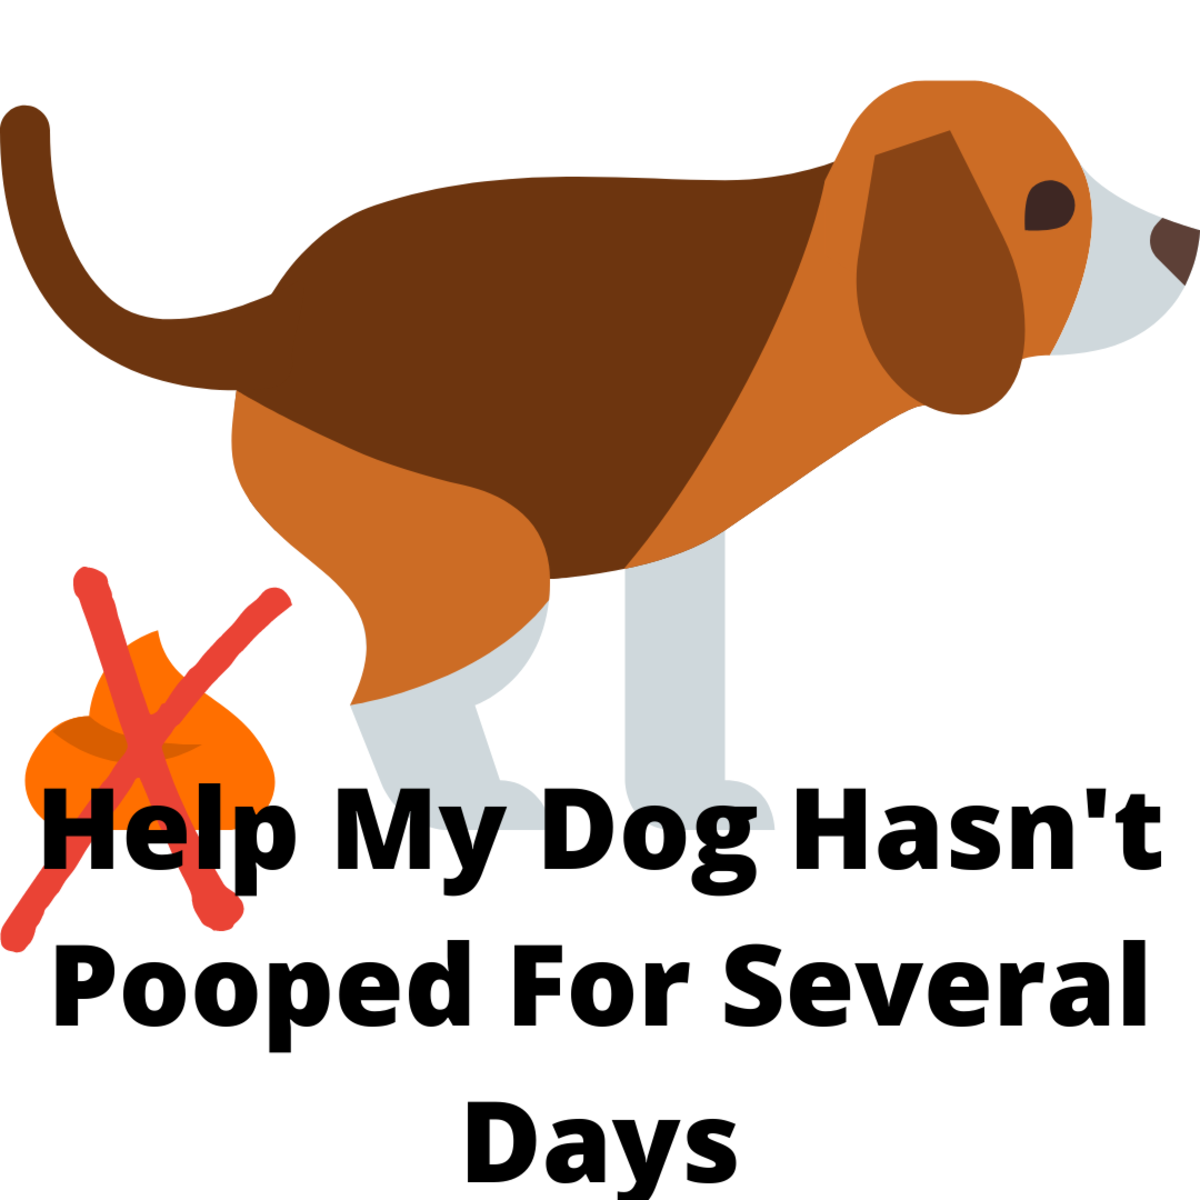 Help, My Dog Hasn't Pooped For Several Days!